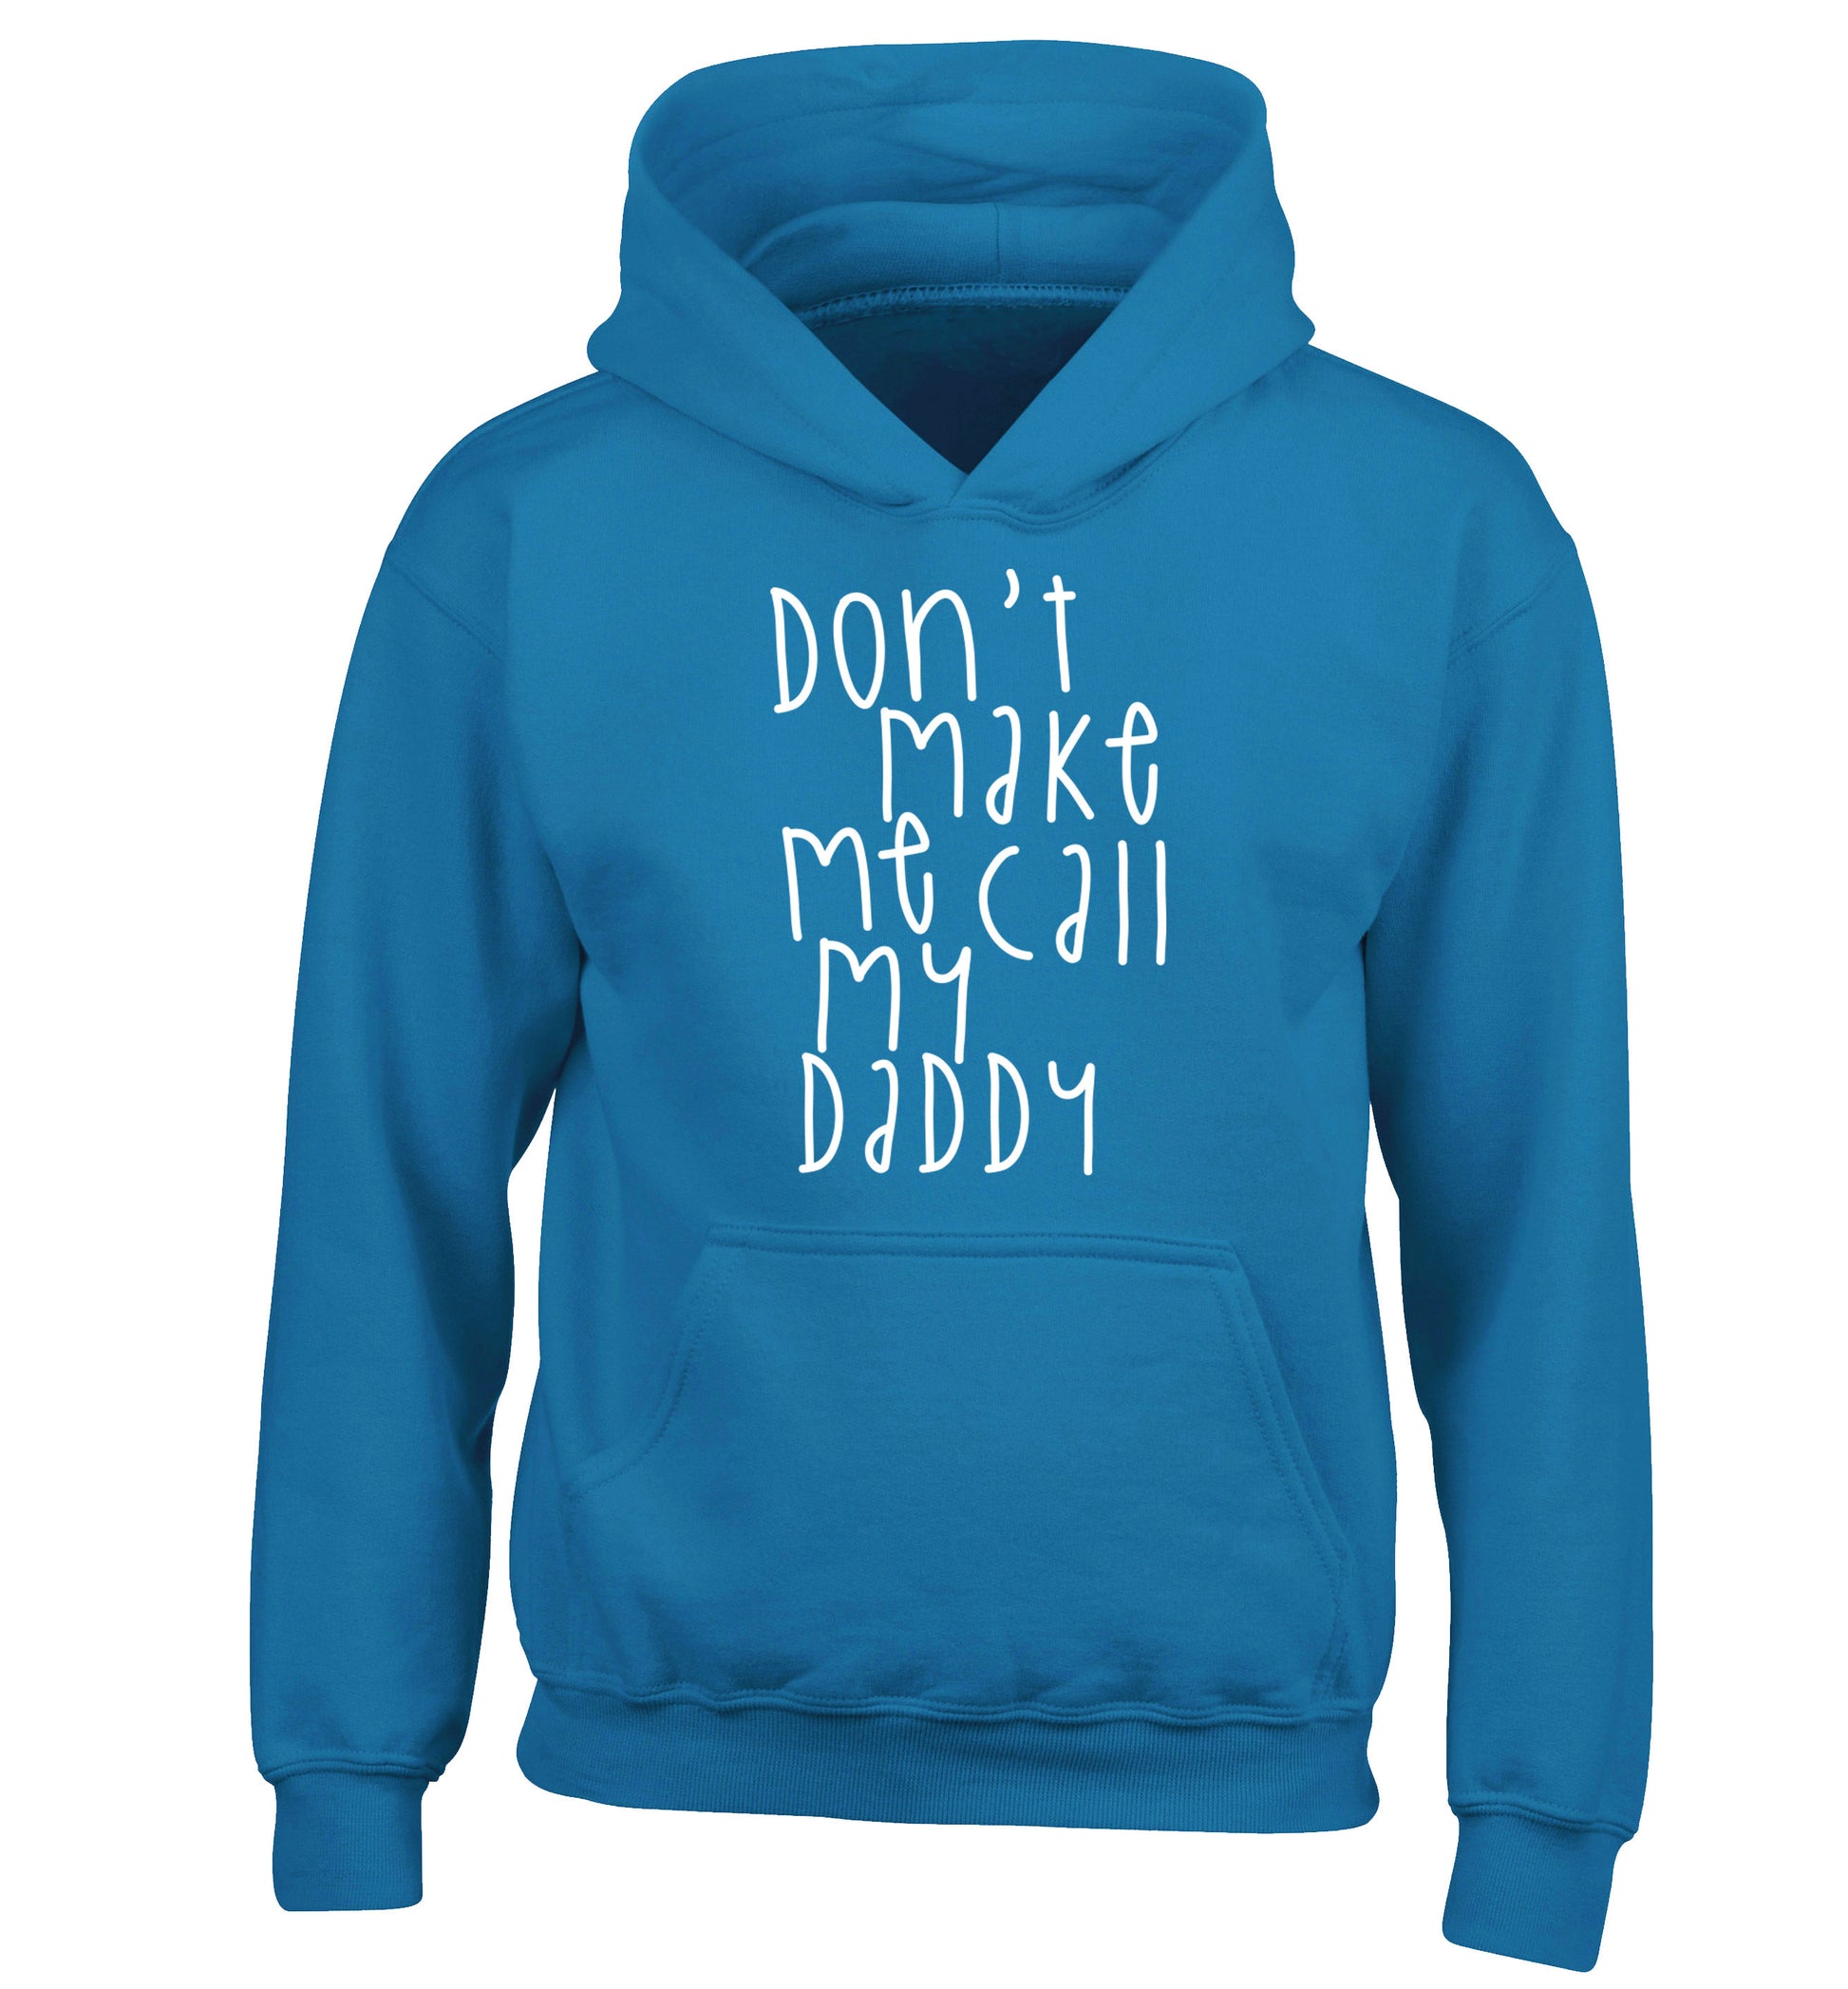 Don't make me call my daddy children's blue hoodie 12-14 Years